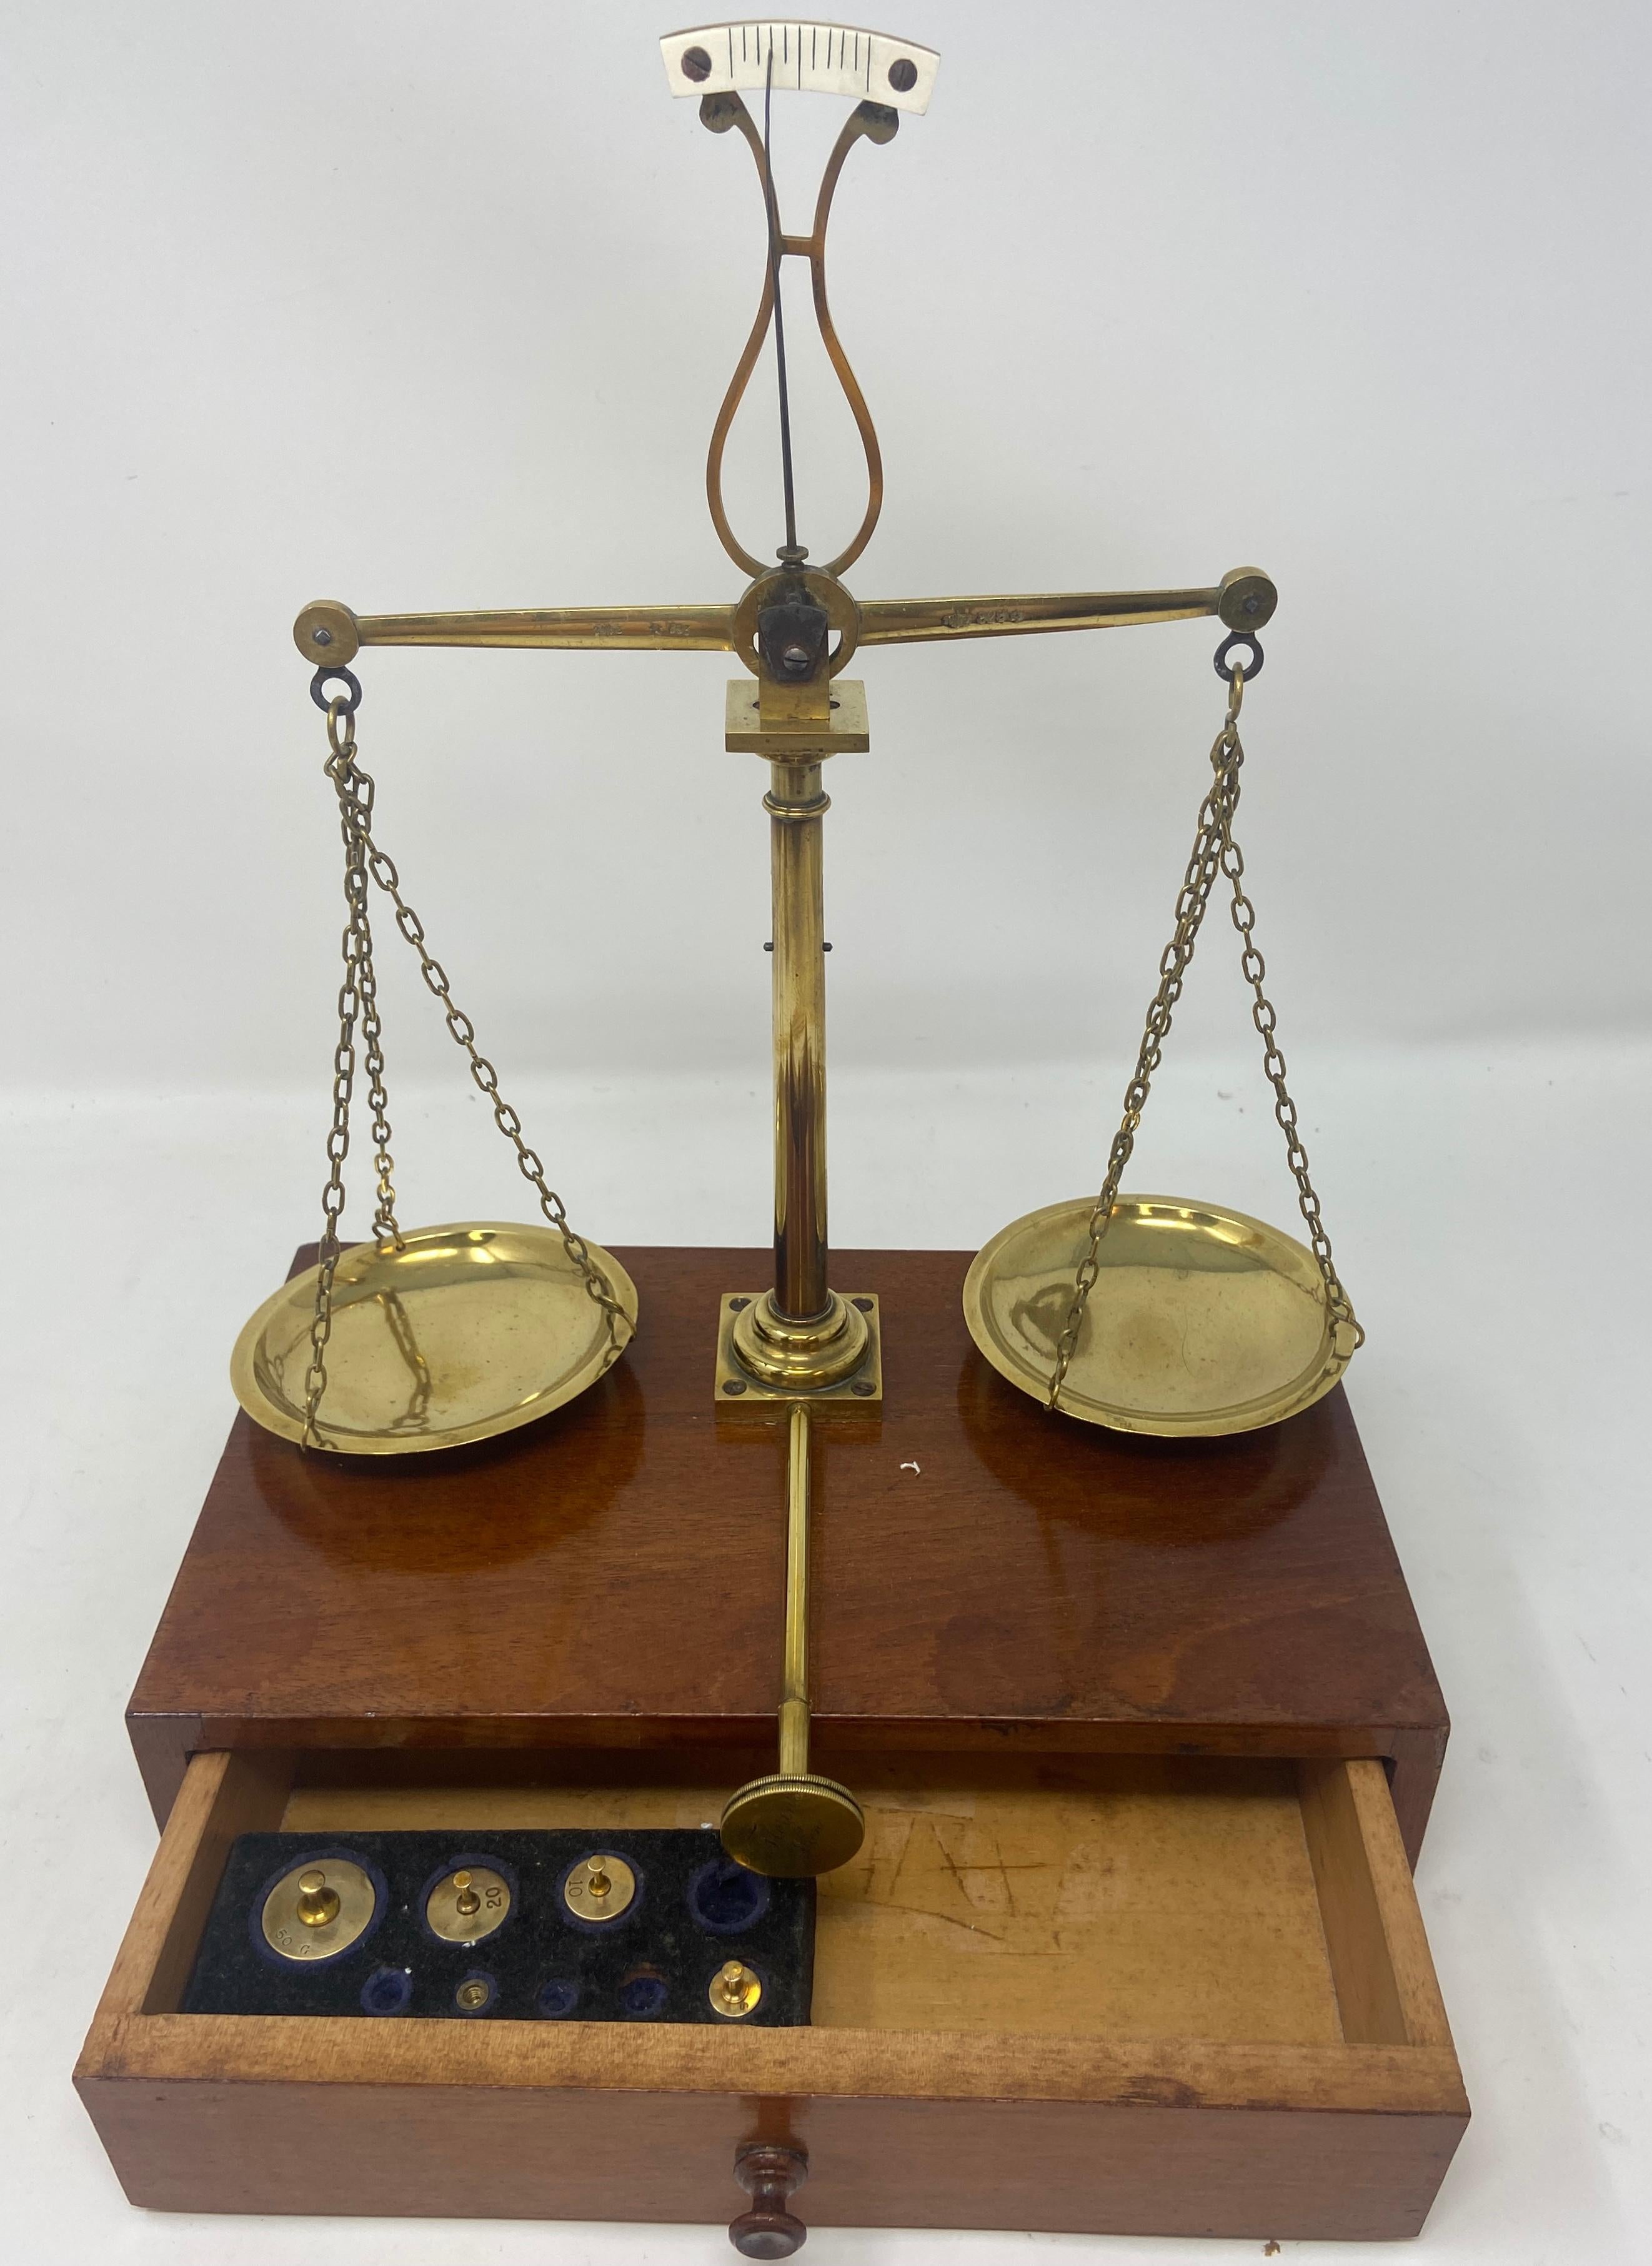 Antique Viennese brass apothecary scale made by 